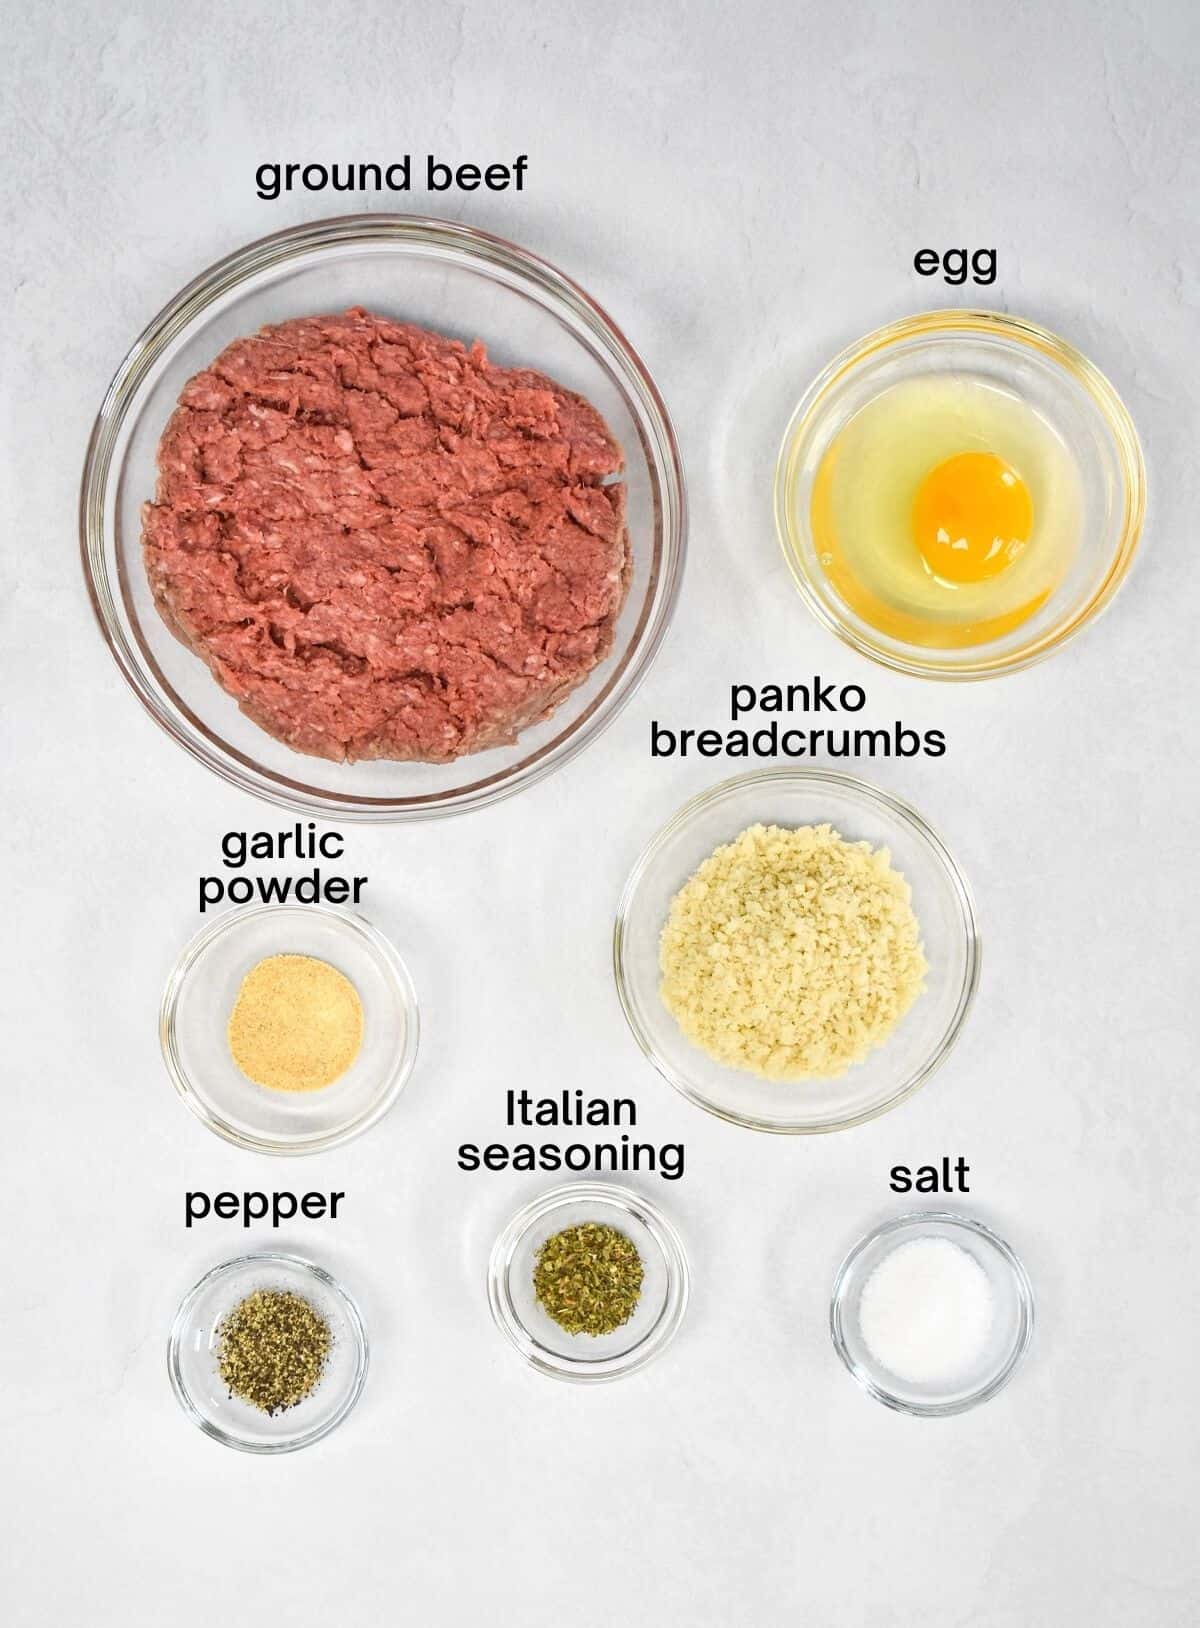 An image of the ingredients for the meatballs separated in clear glass bowls and set on a white table.